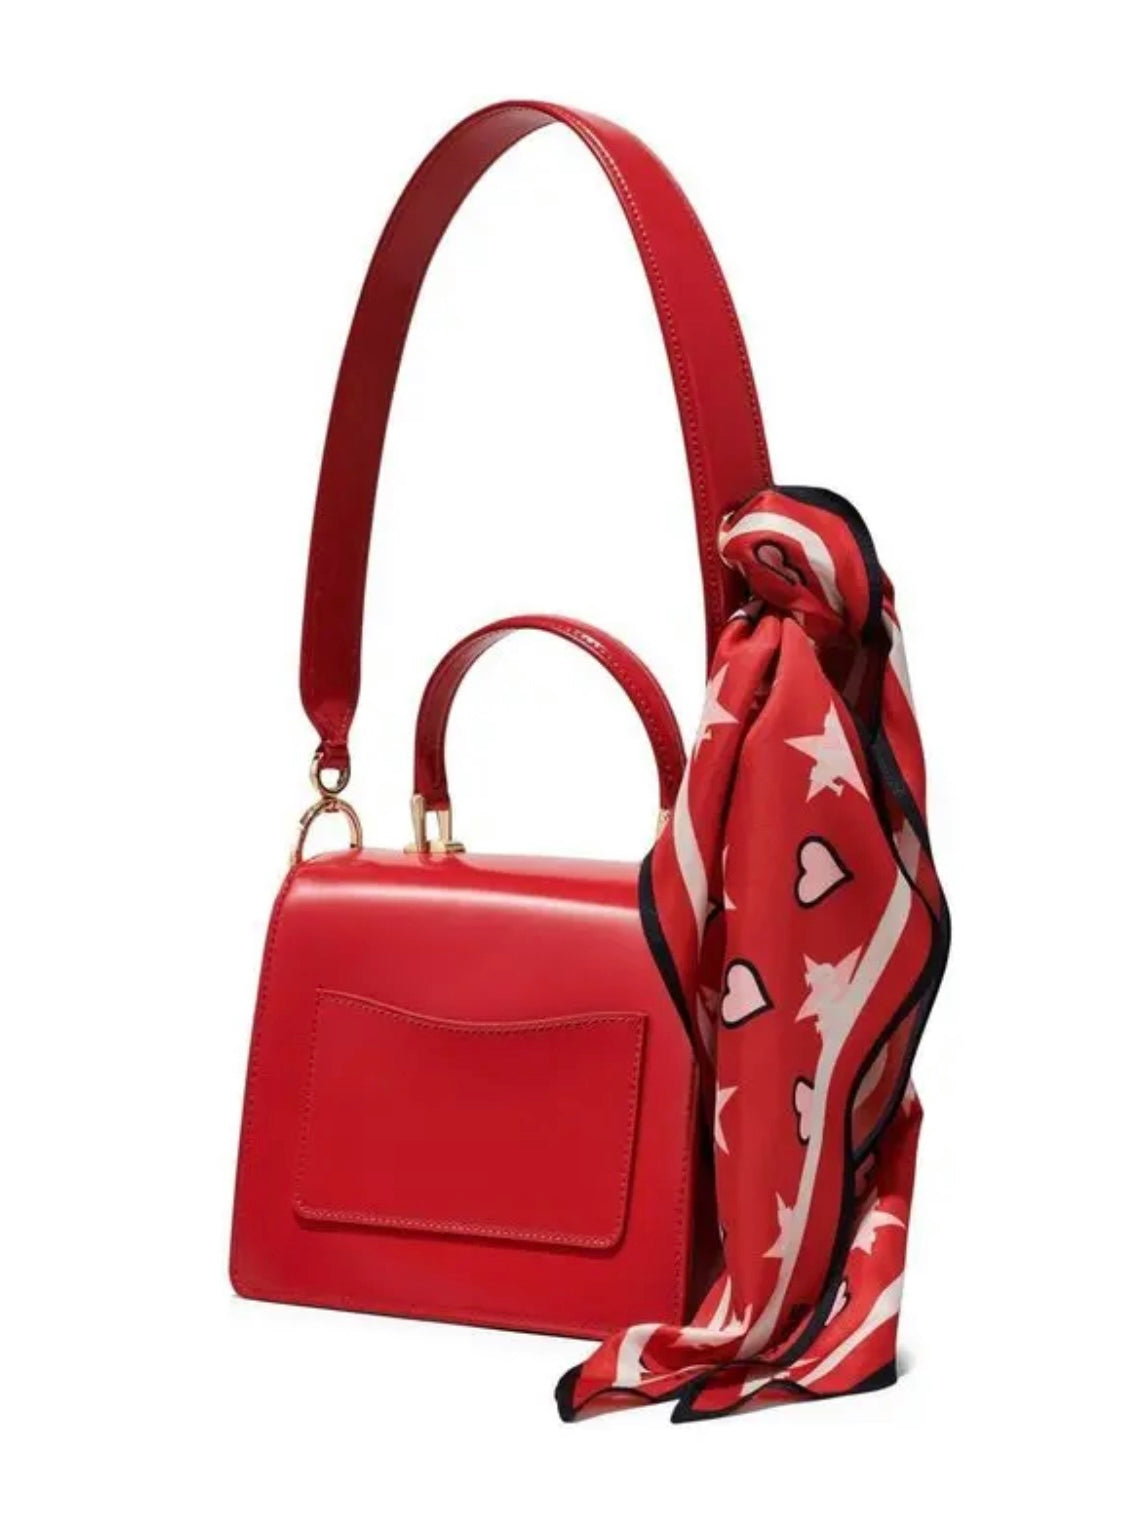 MARC JACOBS  The Uptown Tote Bag - Red